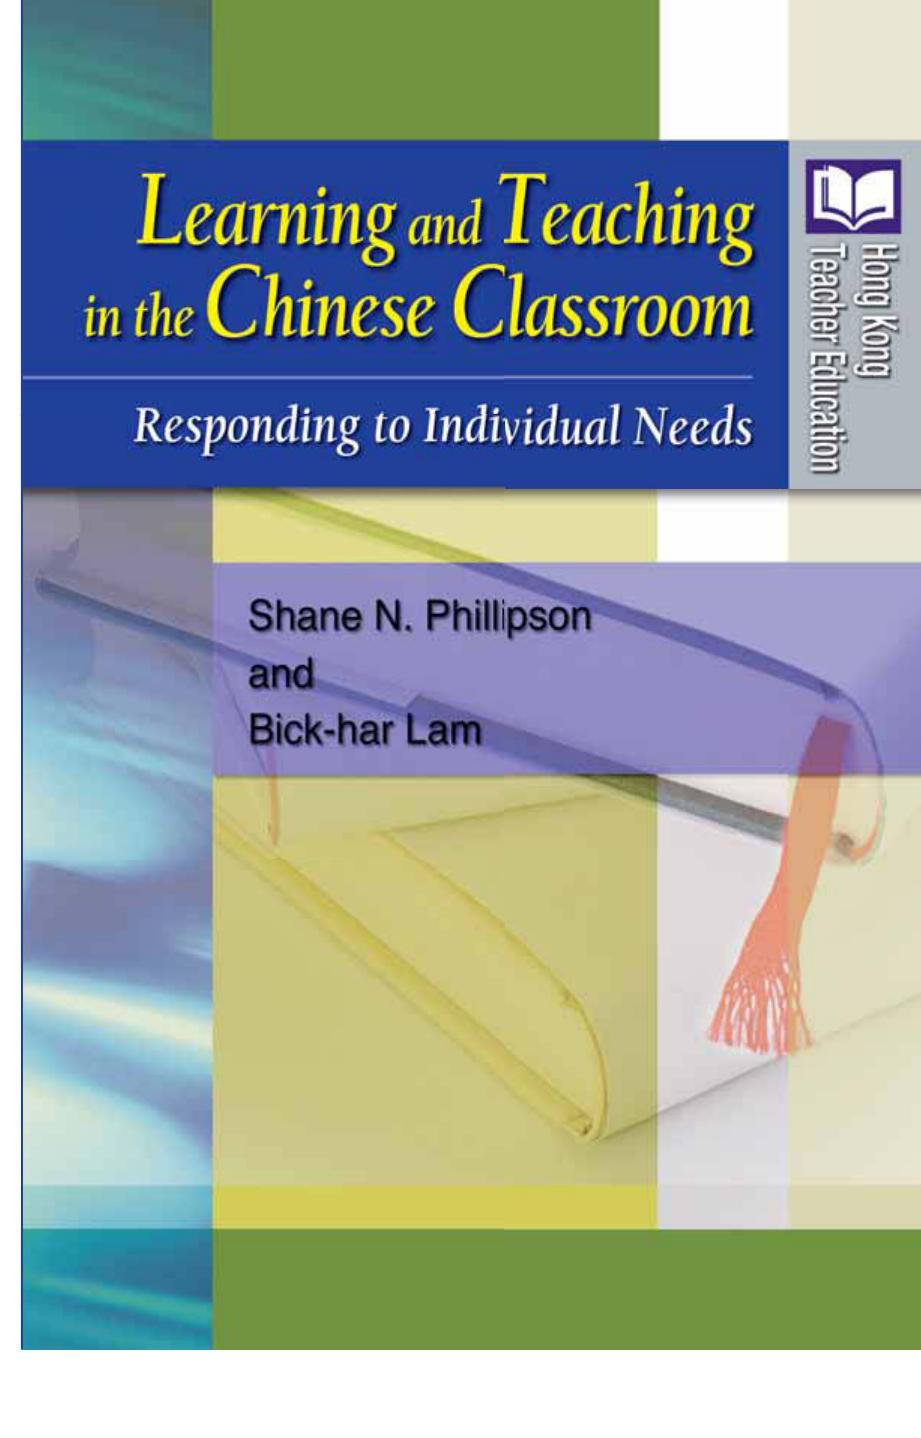 (eBook PDF)Leaning and Teaching in the Chinese Classroom by Bick-har Lam,Shane N. Phillipson